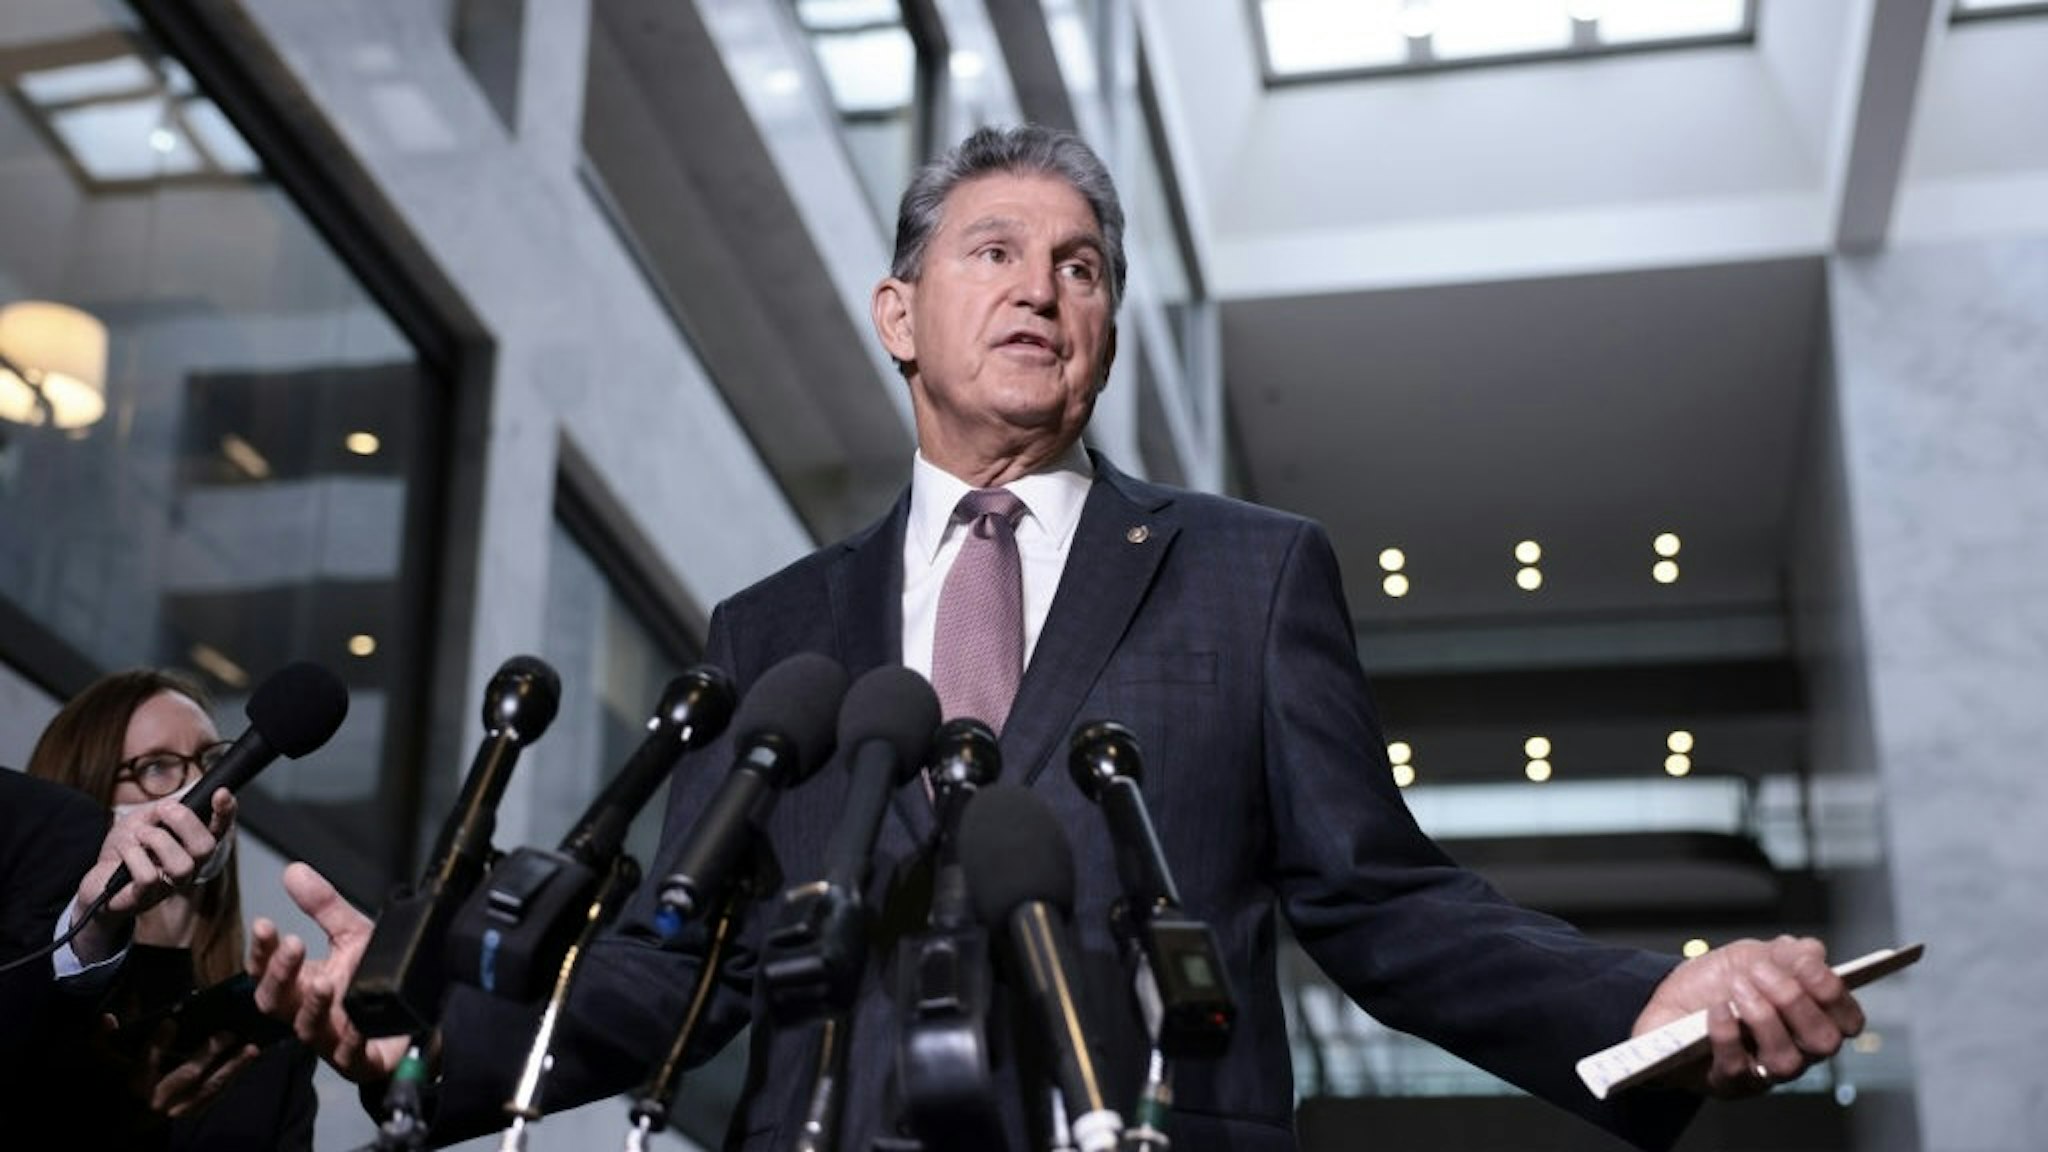 Sen. Manchin Speaks On The Debt Ceiling WASHINGTON, DC - OCTOBER 06: Sen. Joe Manchin (D-WV) speaks at a press conference outside his office on Capitol Hill on October 06, 2021 in Washington, DC. Manchin spoke on the debt limit and the infrastructure bill. (Photo by Anna Moneymaker/Getty Images) Anna Moneymaker / Staff